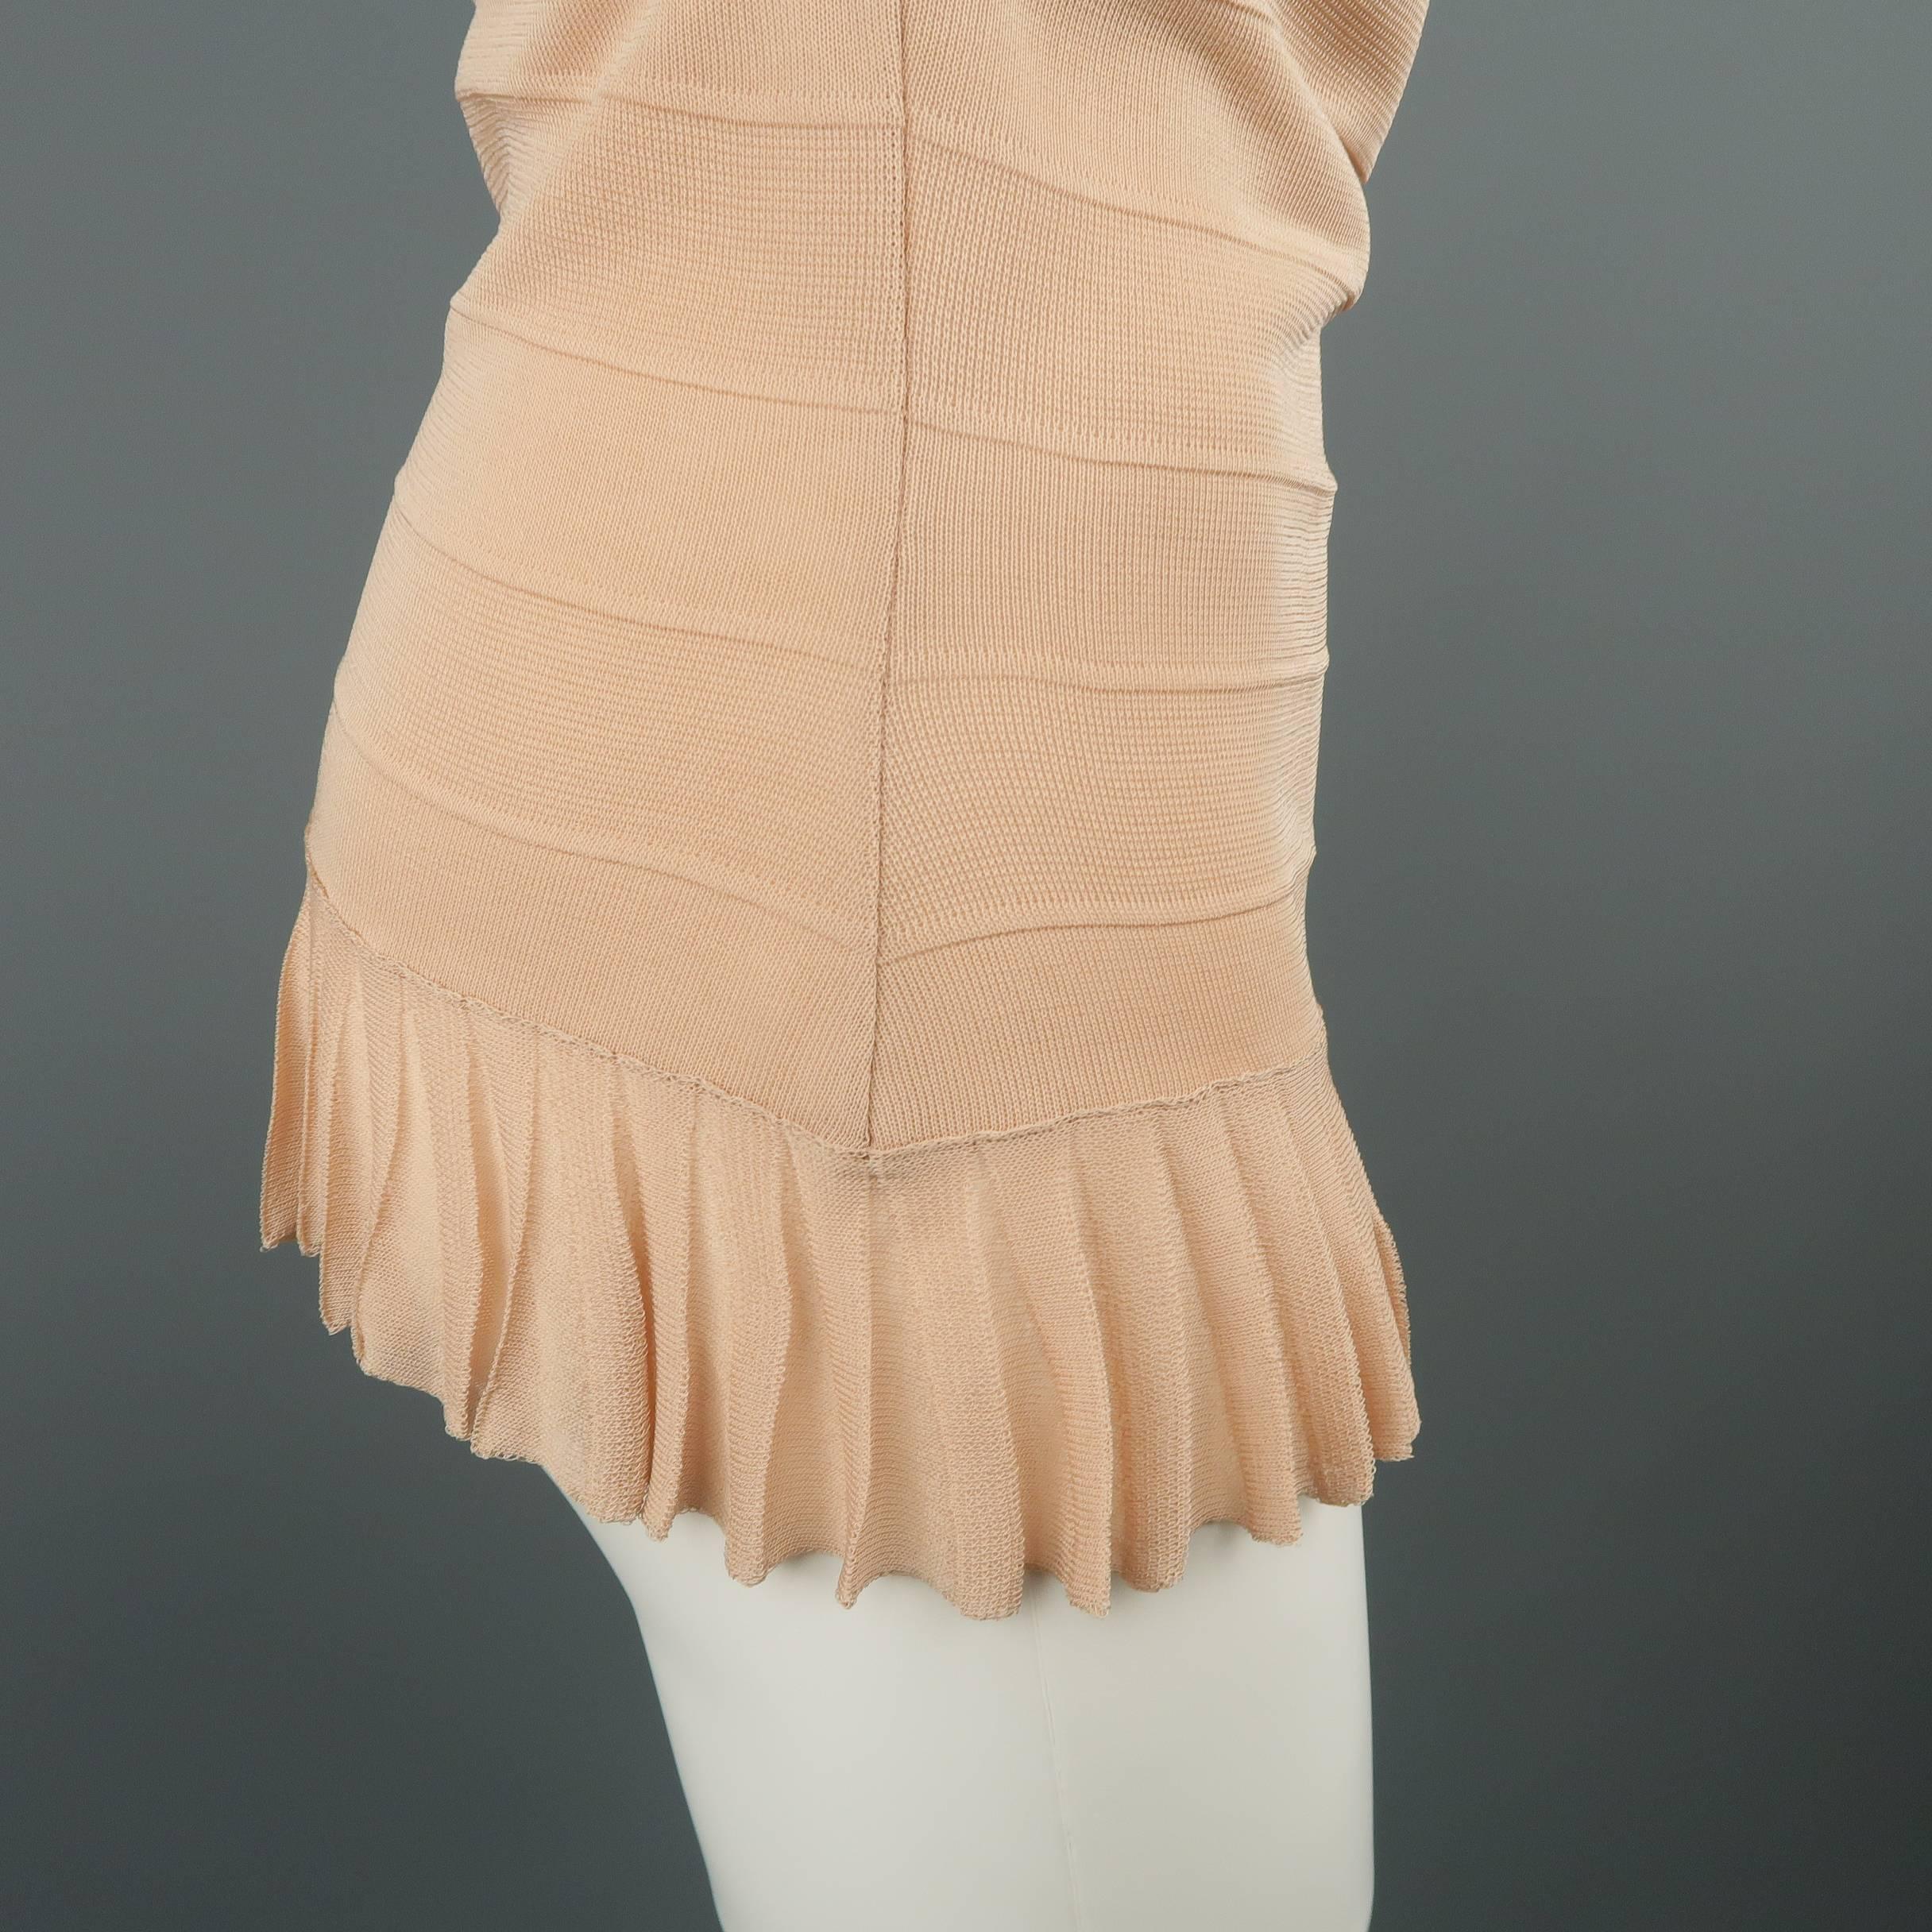 CHANEL Size 8 Pink Rayon Knit Pleated Camisole Dress Top 1